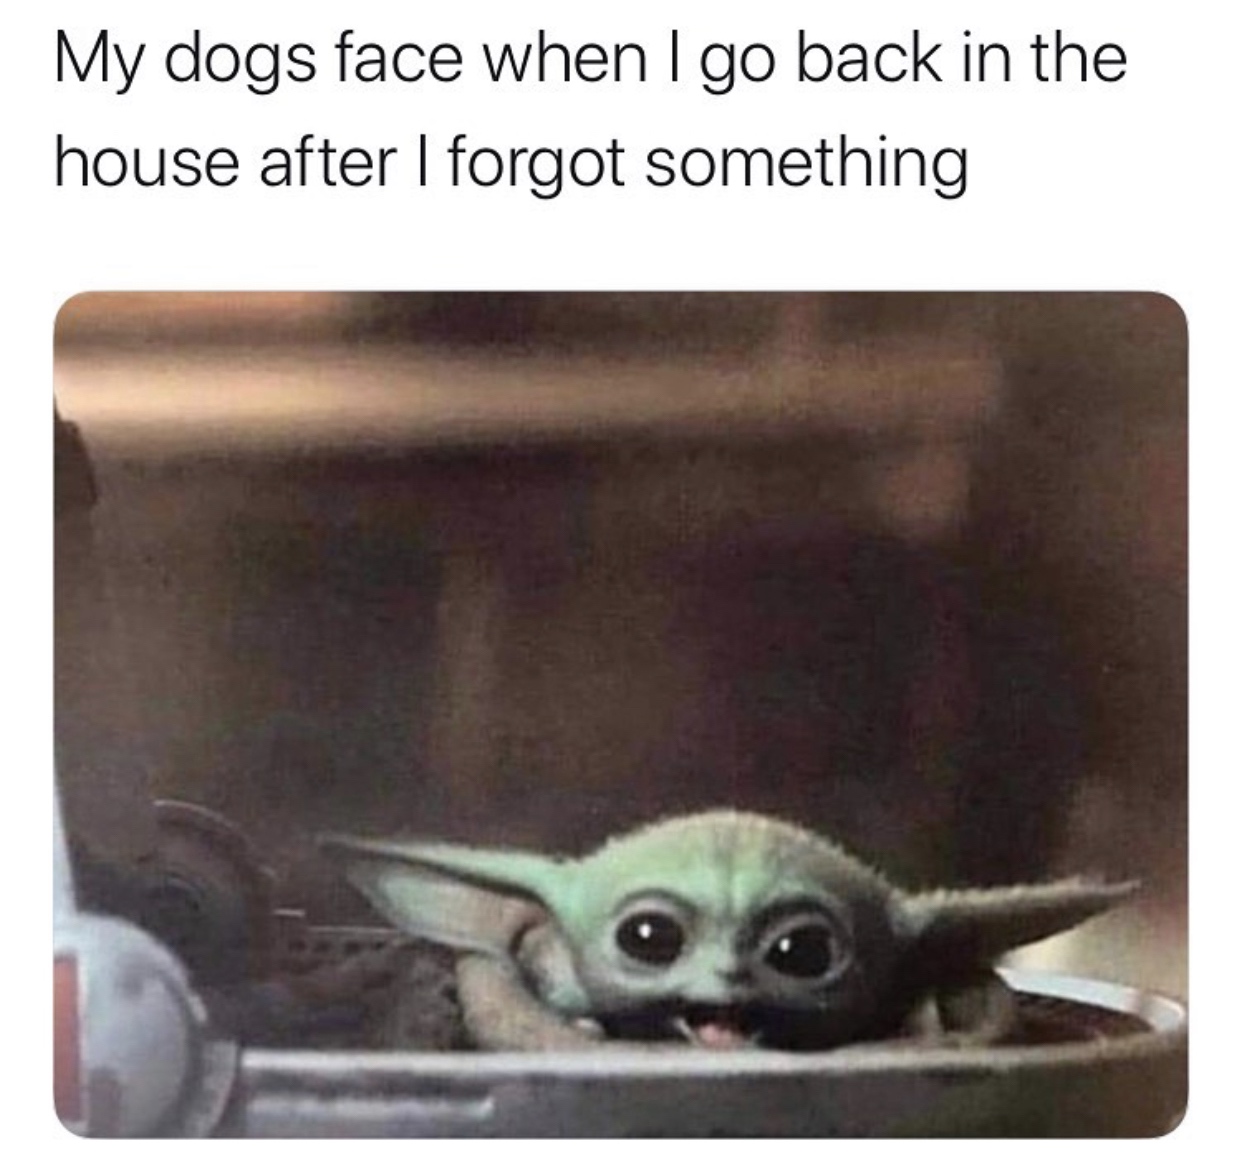 baby yoda meme heart - My dogs face when I go back in the house after I forgot something